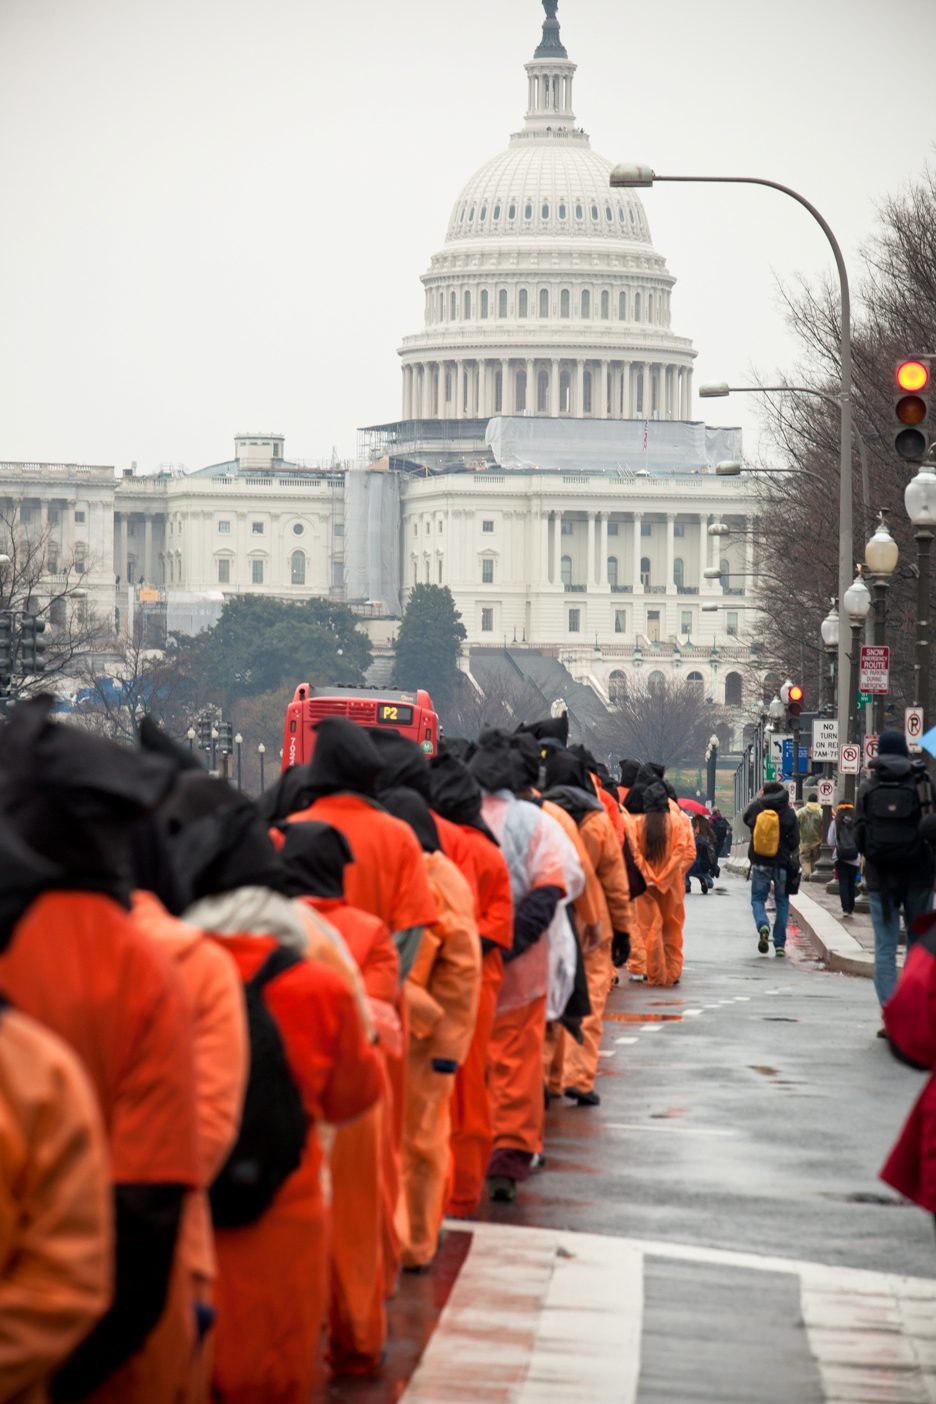 Amnesty International USA activists, marching toward the US Capitol, protest the 10th anniversary of the Guantanamo Bay detention centre, Washington DC, USA, 11 January 2012.